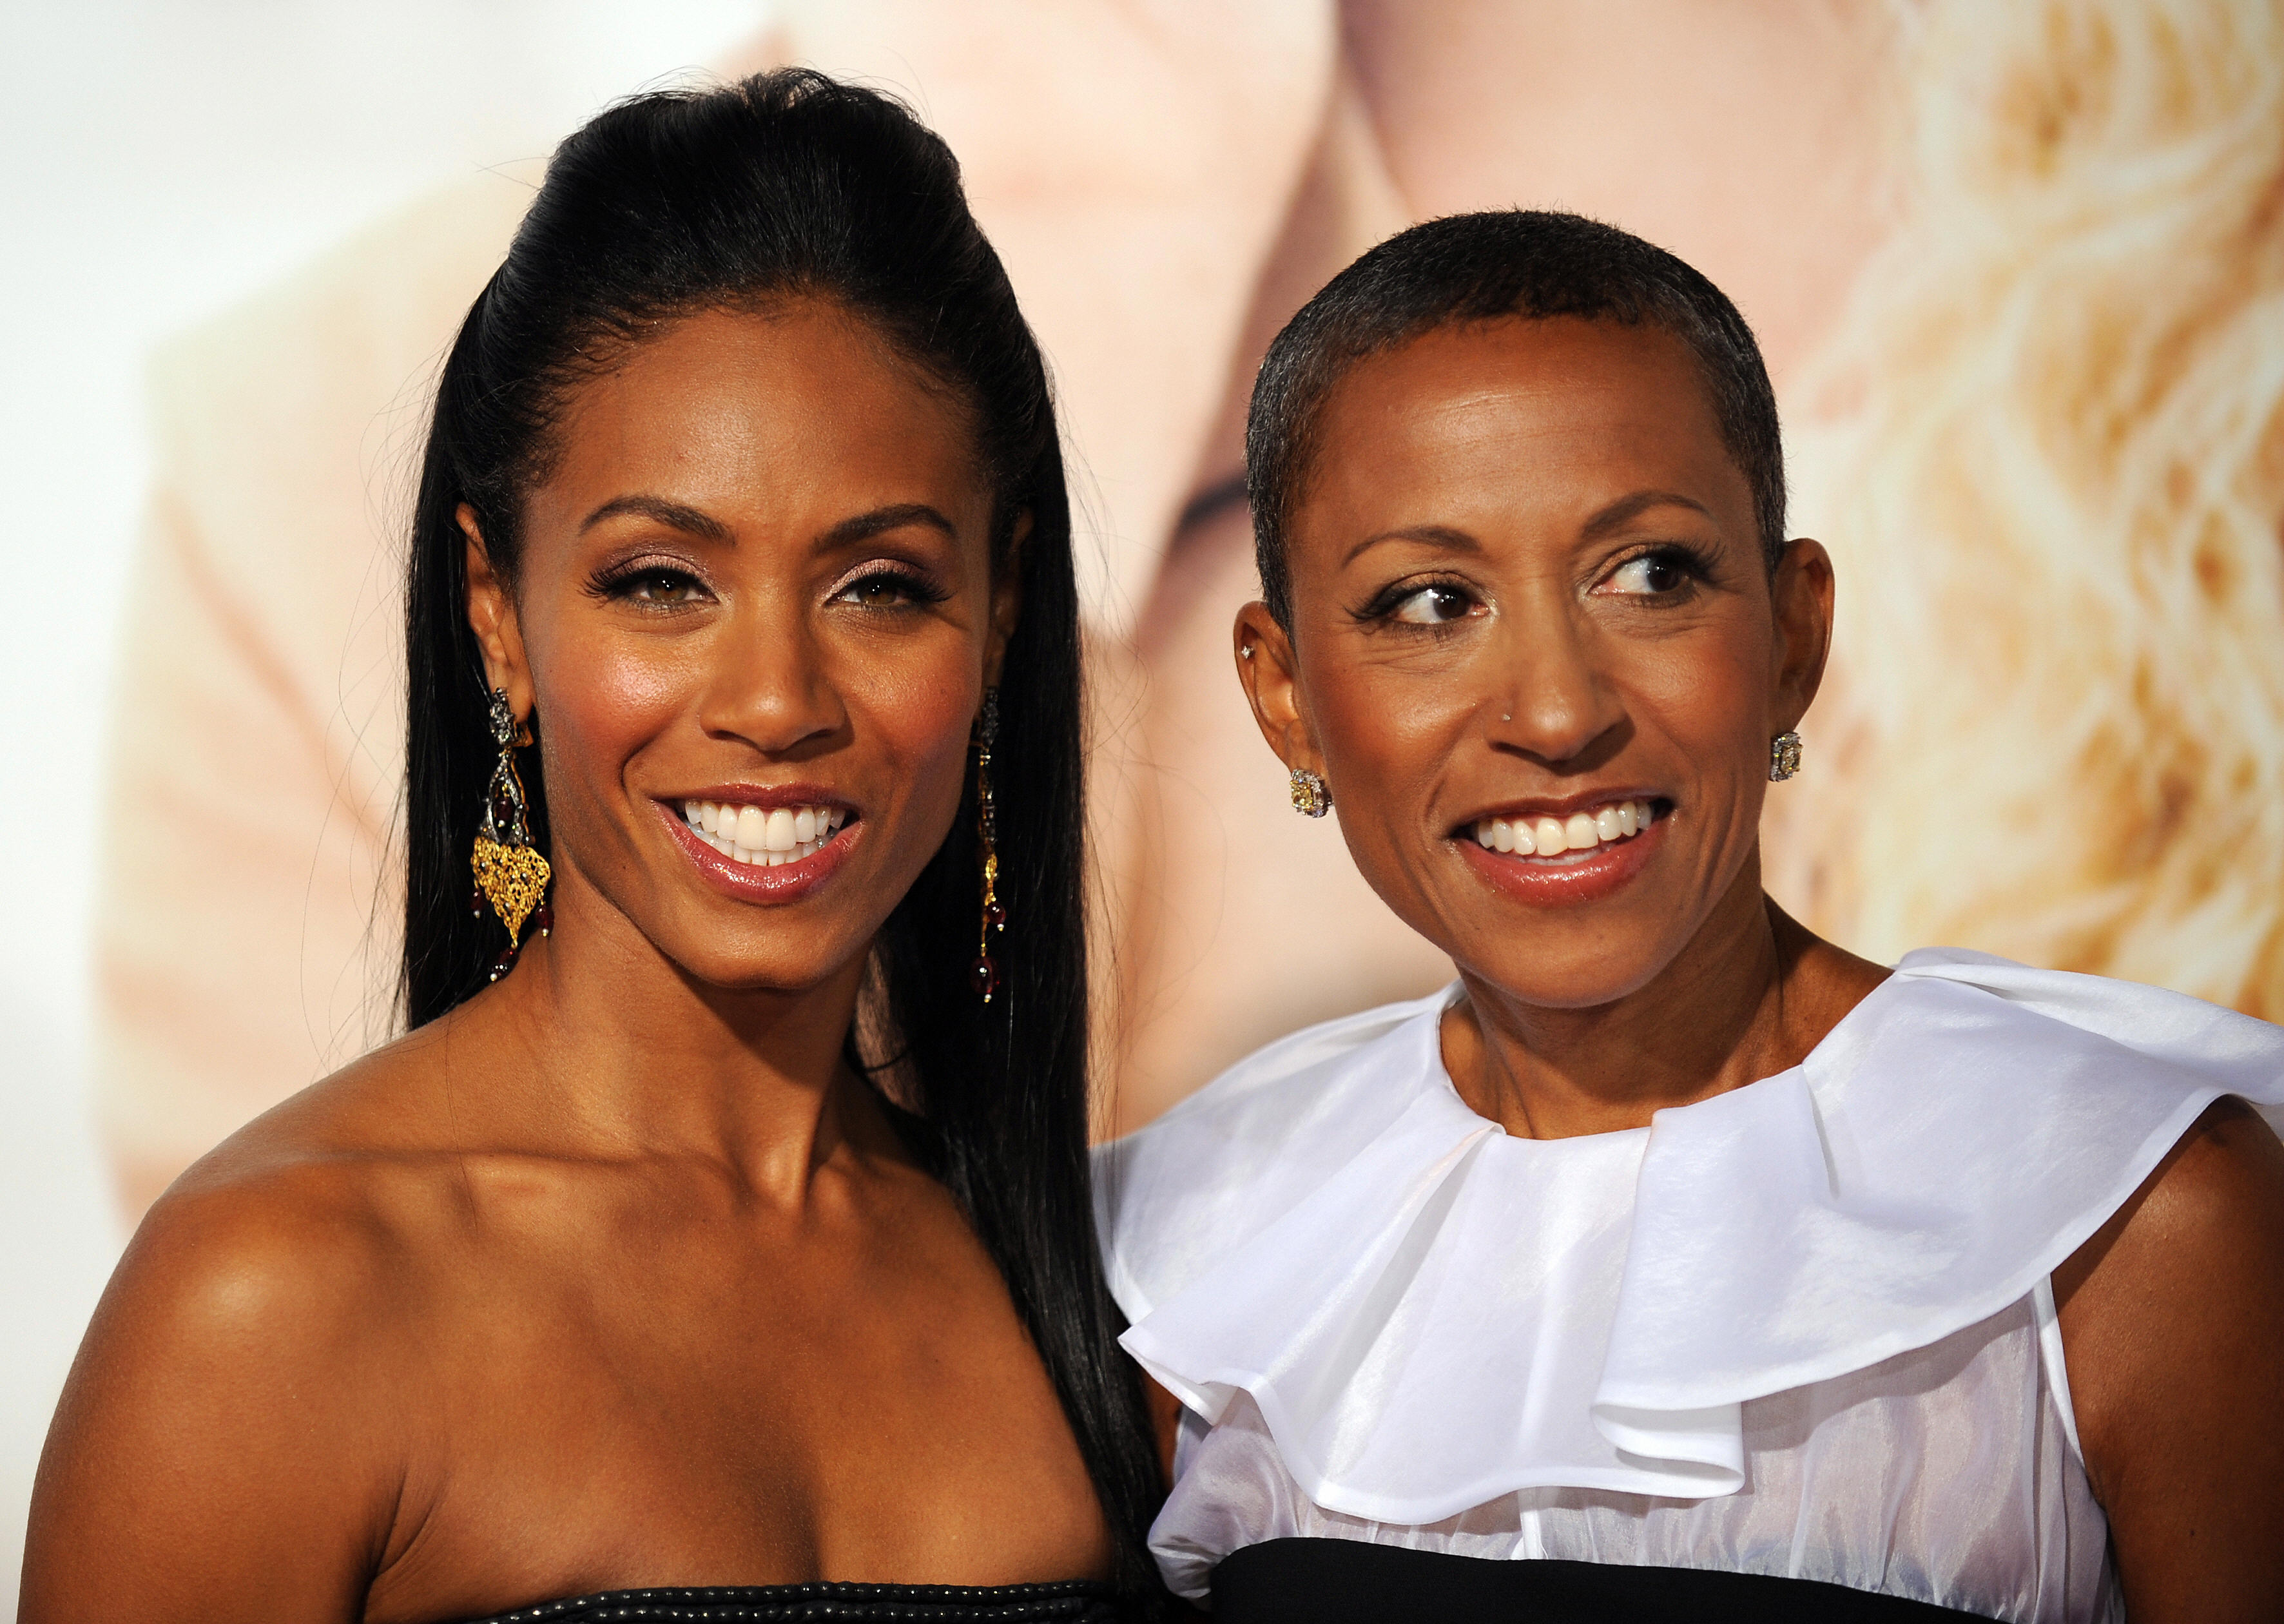 Jada Pinkett Smith smiling at an event/Adrienne Banfield-Norris smiling in a white dress at an event.